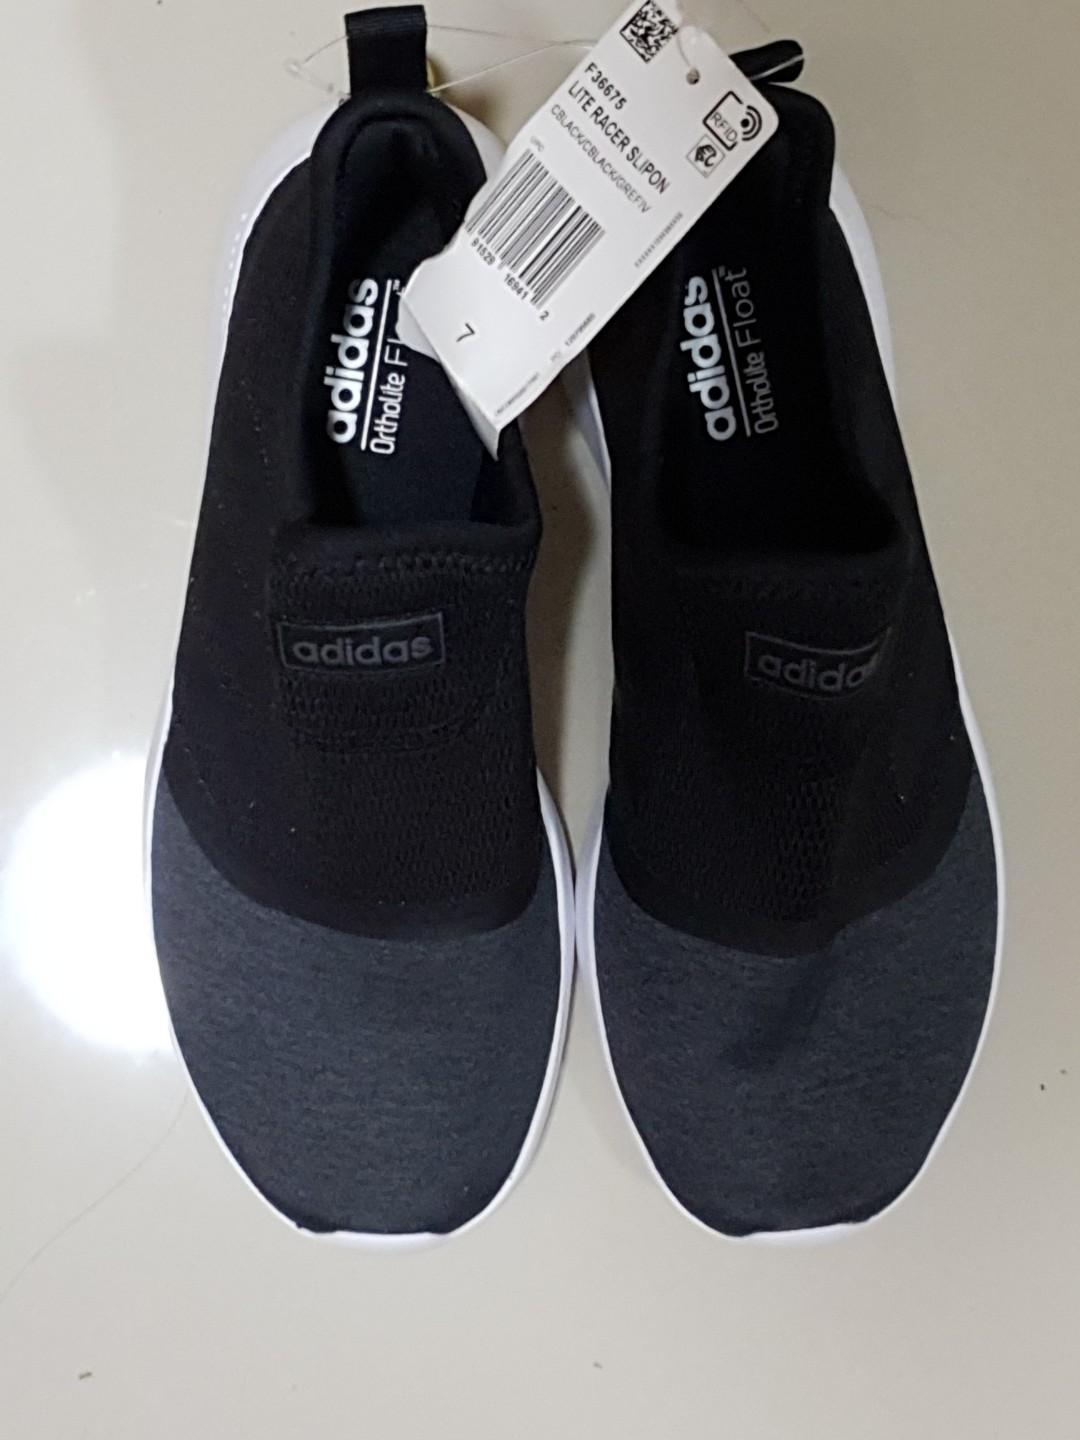 Adidas Lite Racer Slip On Shoes Cloudfoam Ortholite, Women's Fashion, Footwear, Sneakers on Carousell